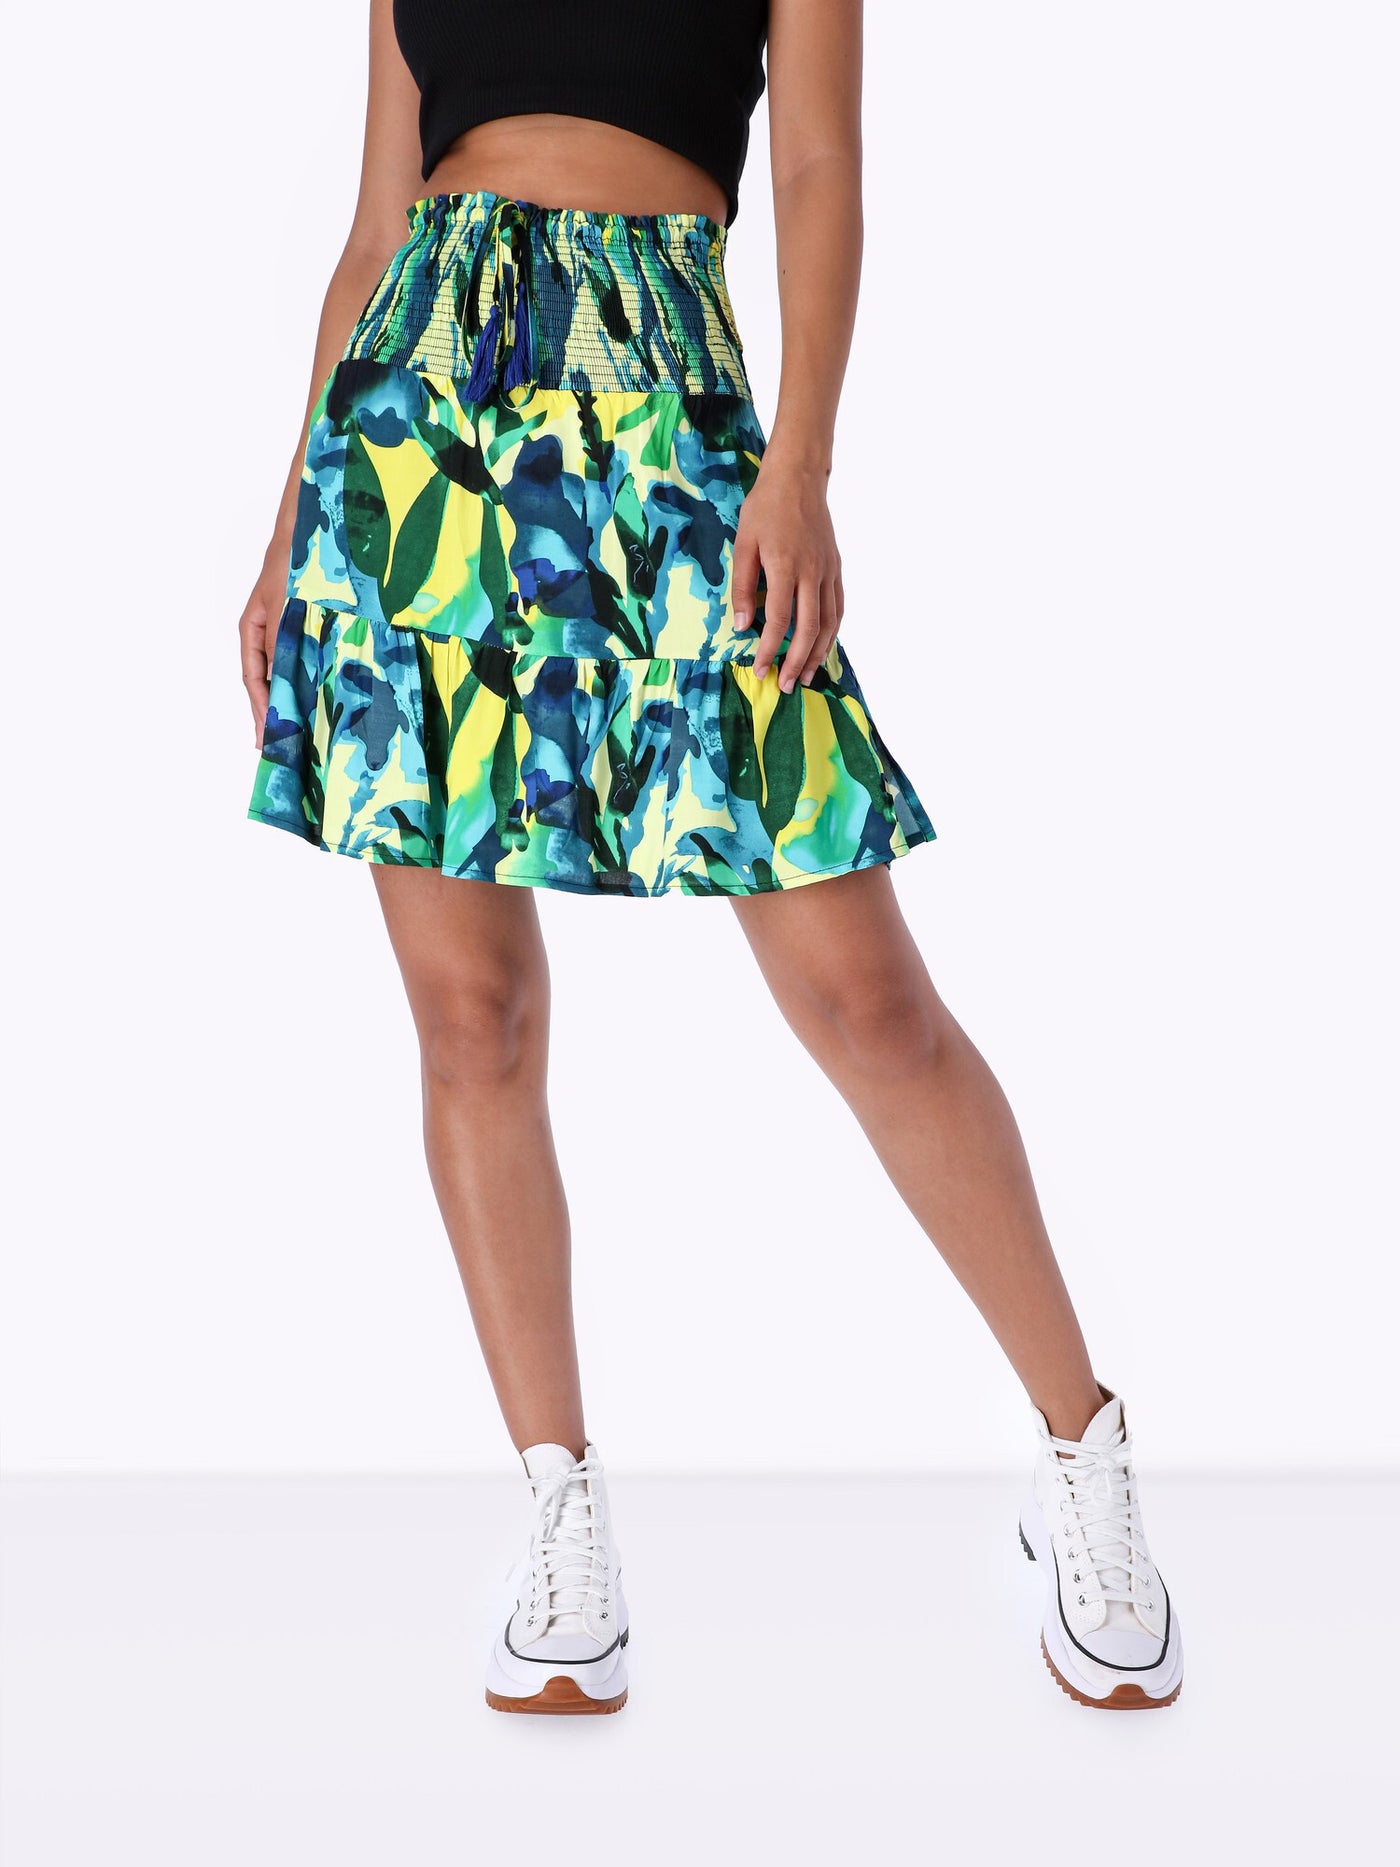 OR Women's All-Over Print Gypsy Skirt